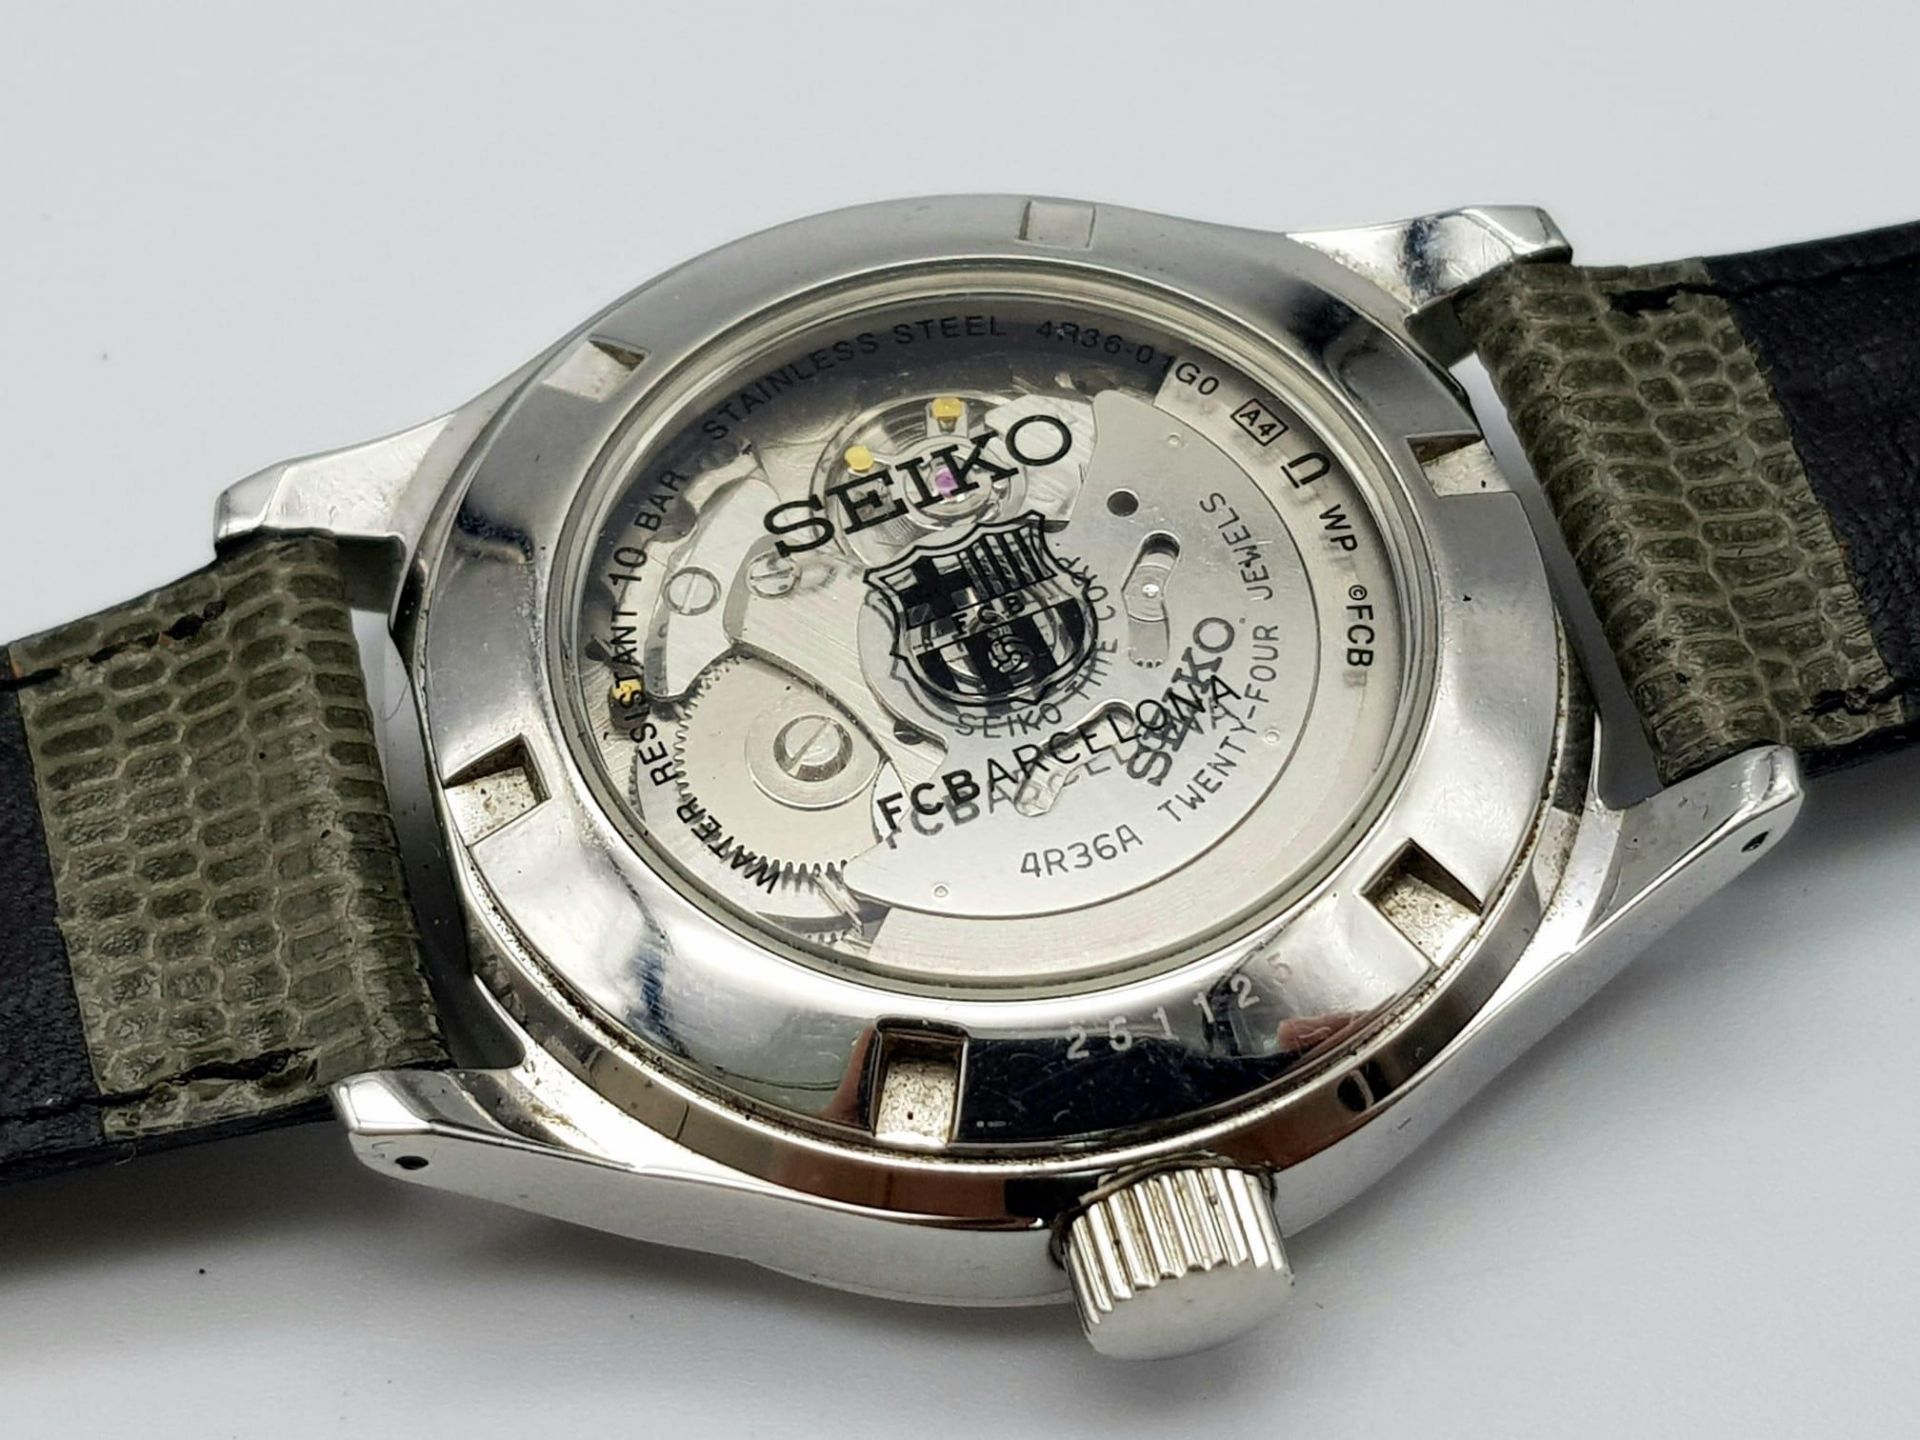 A SEIKO "BARCELONA F.C."AUTOMATIC GENTS WATCH WITH SKELETON BACK , NEVER WORN AS NEW WITH TAGS STILL - Bild 5 aus 7